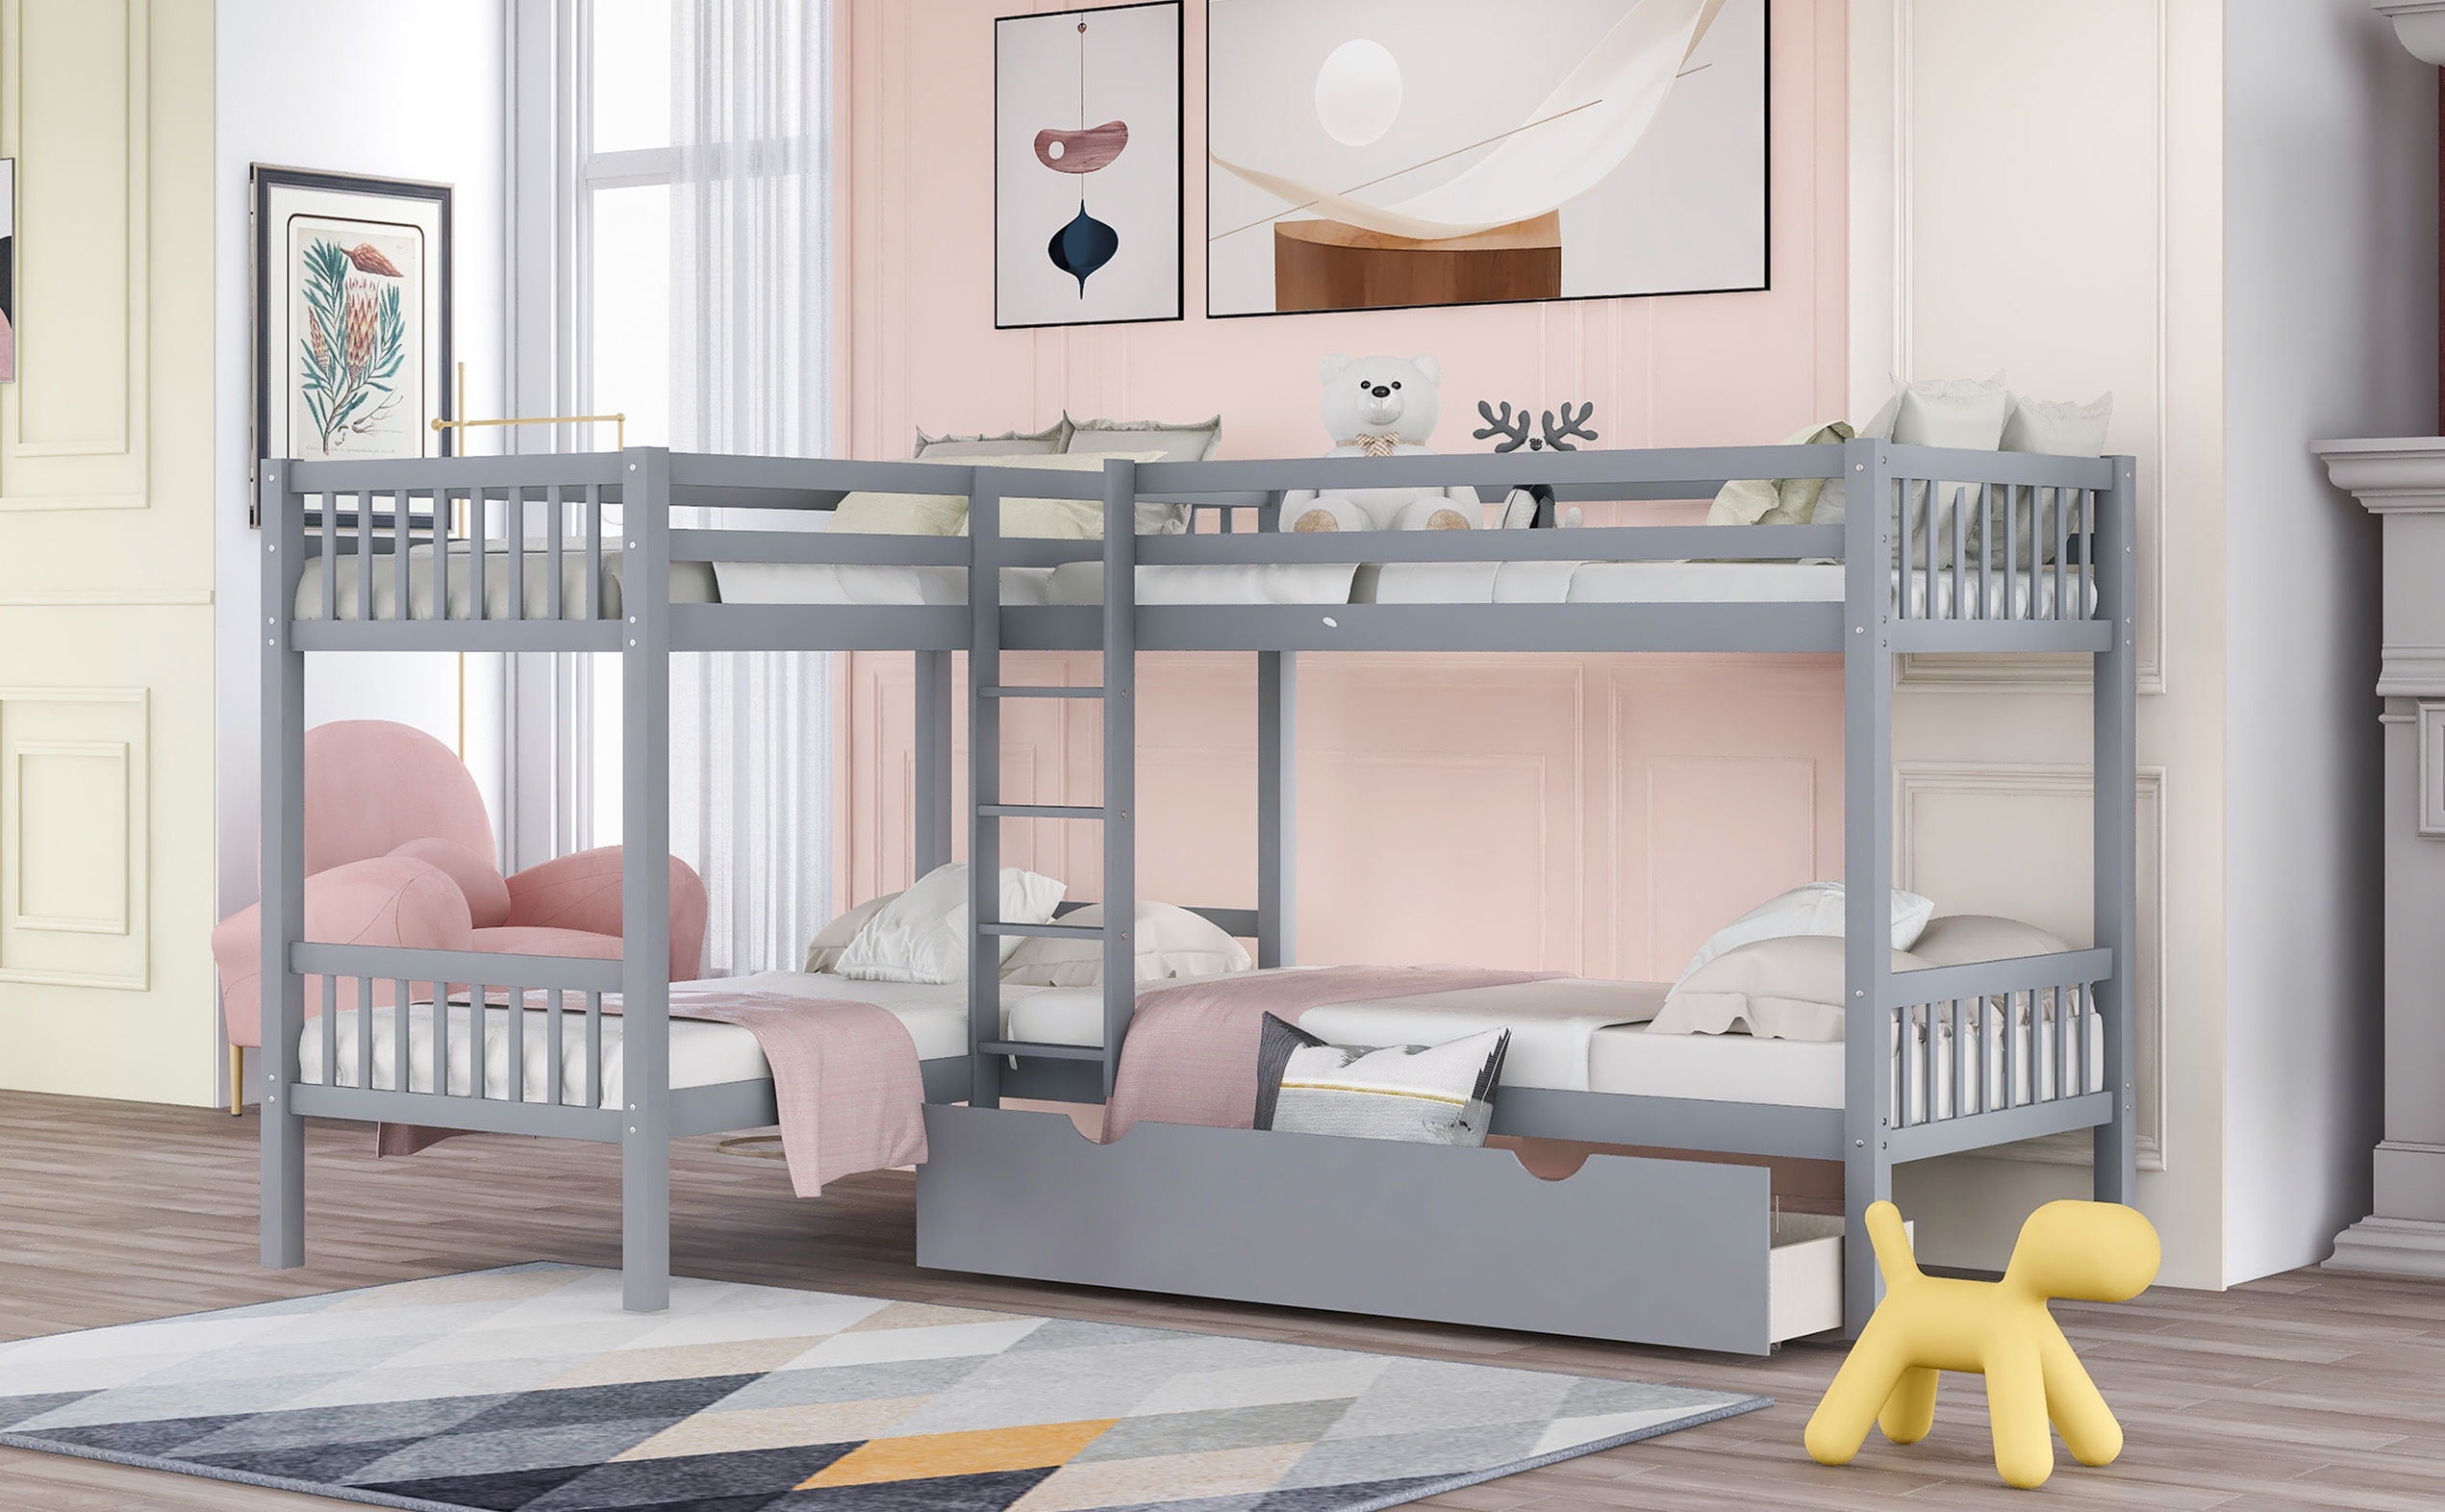 twin over full bunk bed l shaped